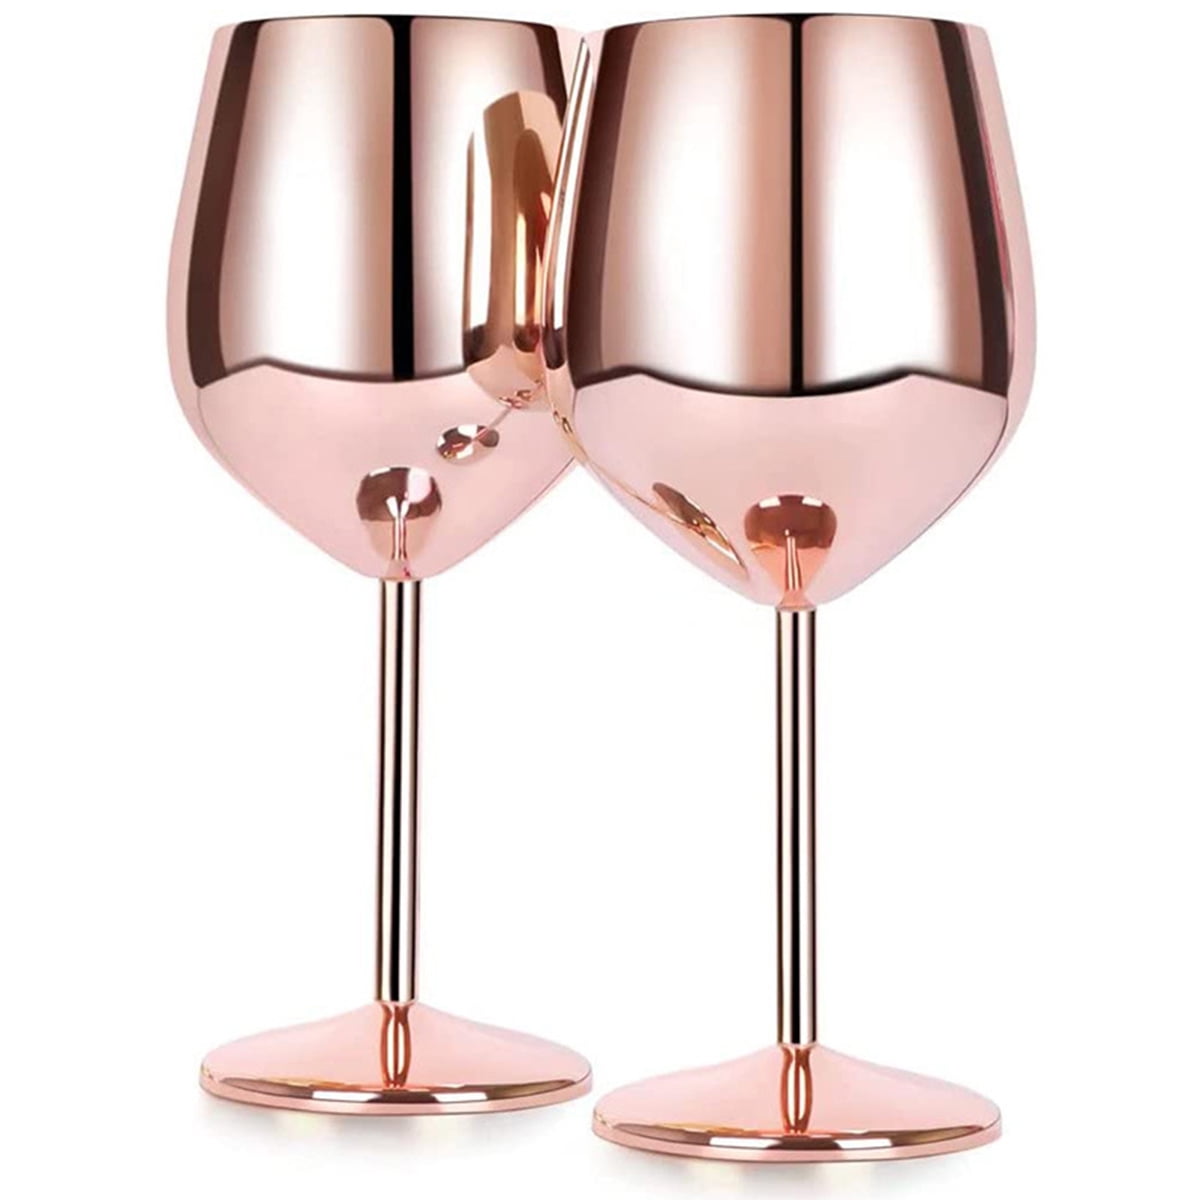 WOTOR Gold Wine Glasses Set of 2 with Wine Stopper, 18oz Unbreakable Gold Goblet, Stainless Steel Wine Glass, Fancy, Unique and Portable Metal Wine